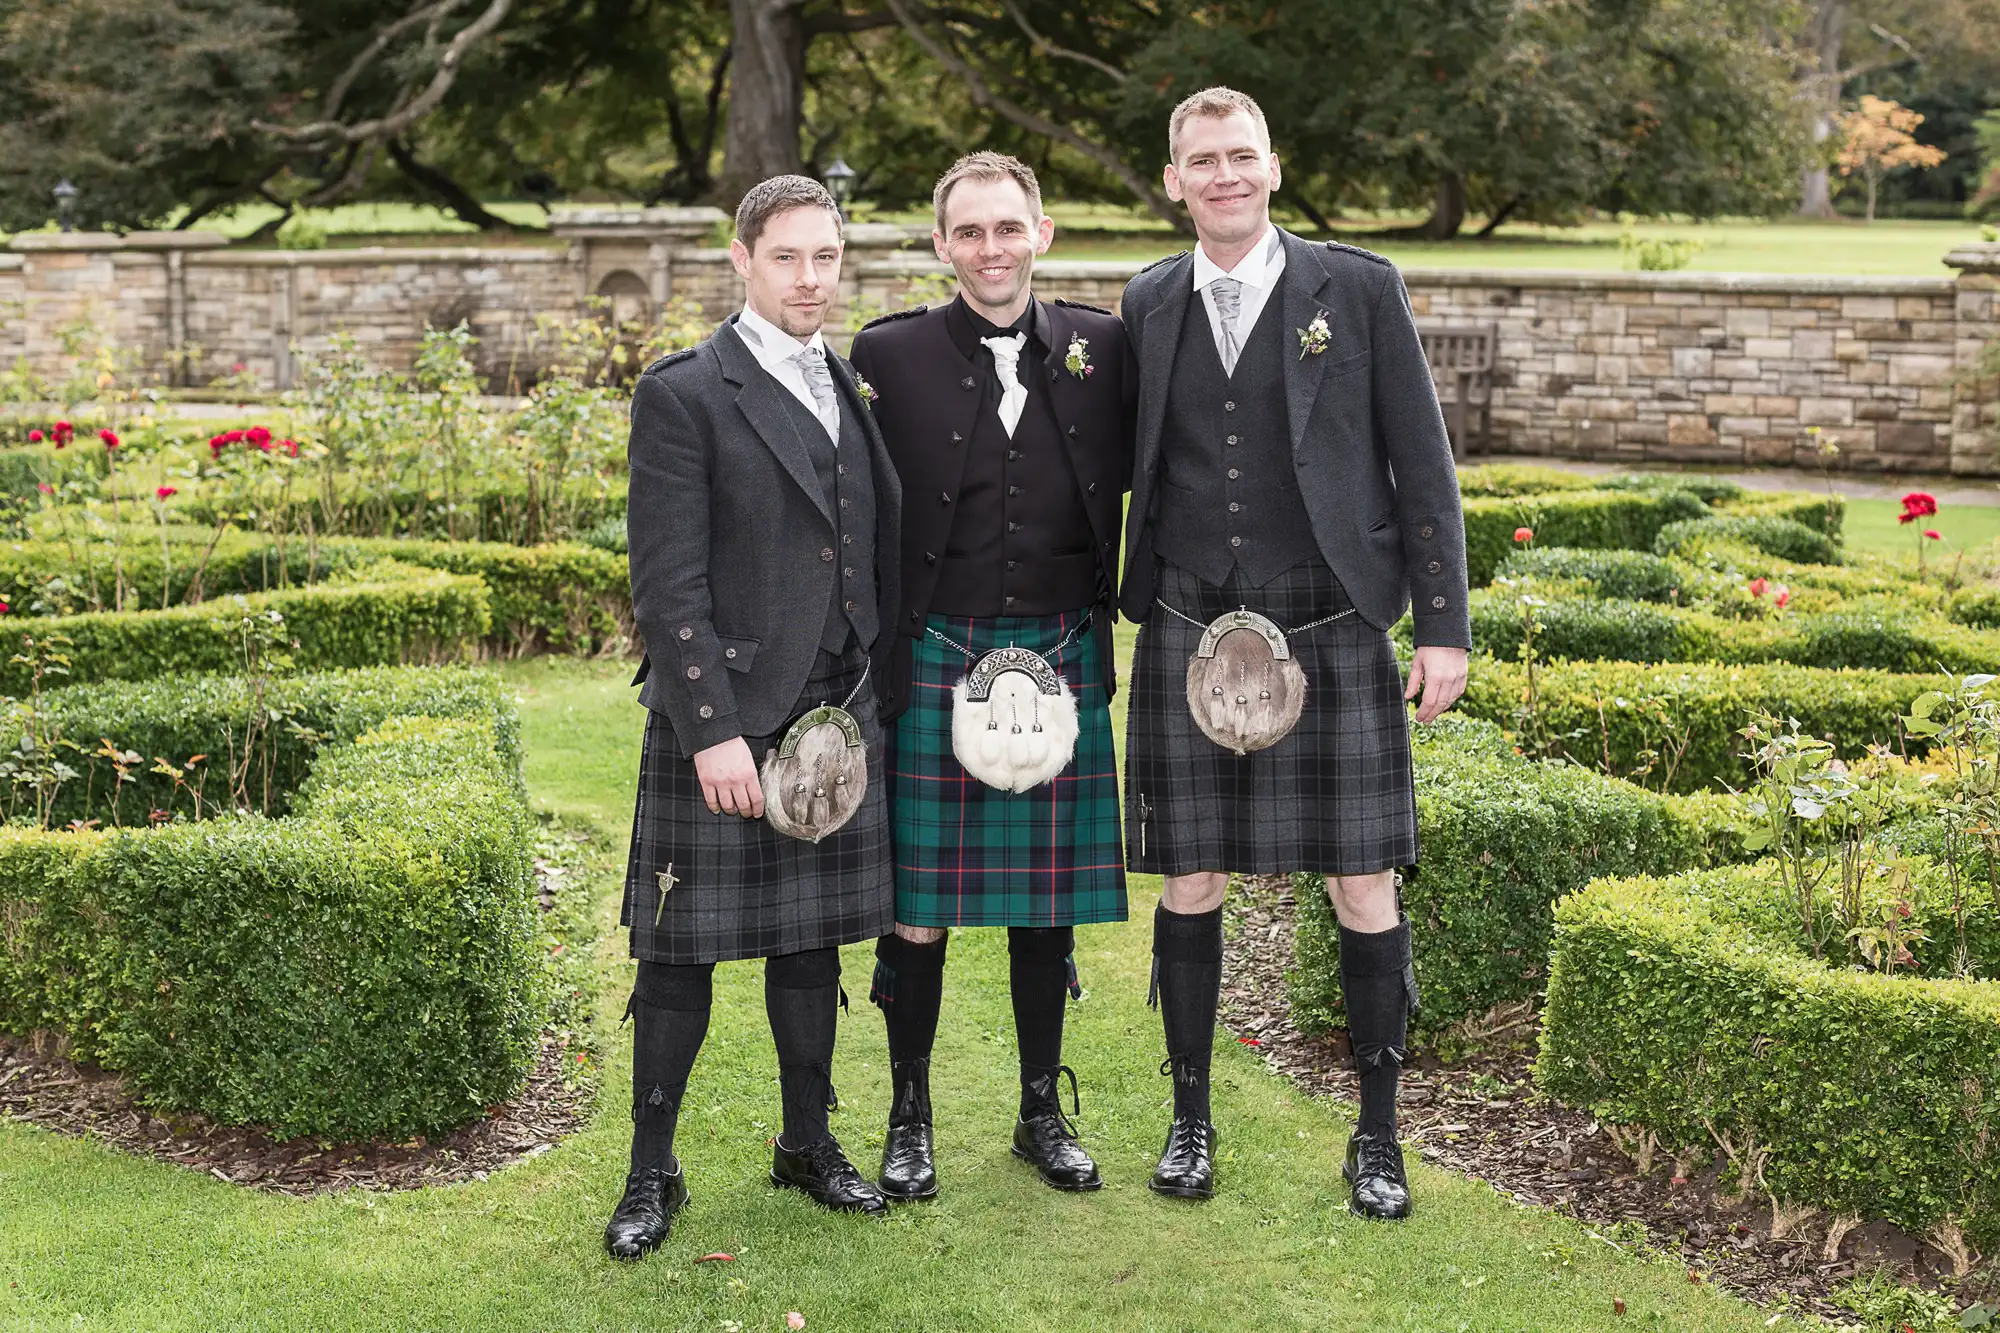 Three men wearing traditional scottish kilts and sporran pouches posing together in a garden.